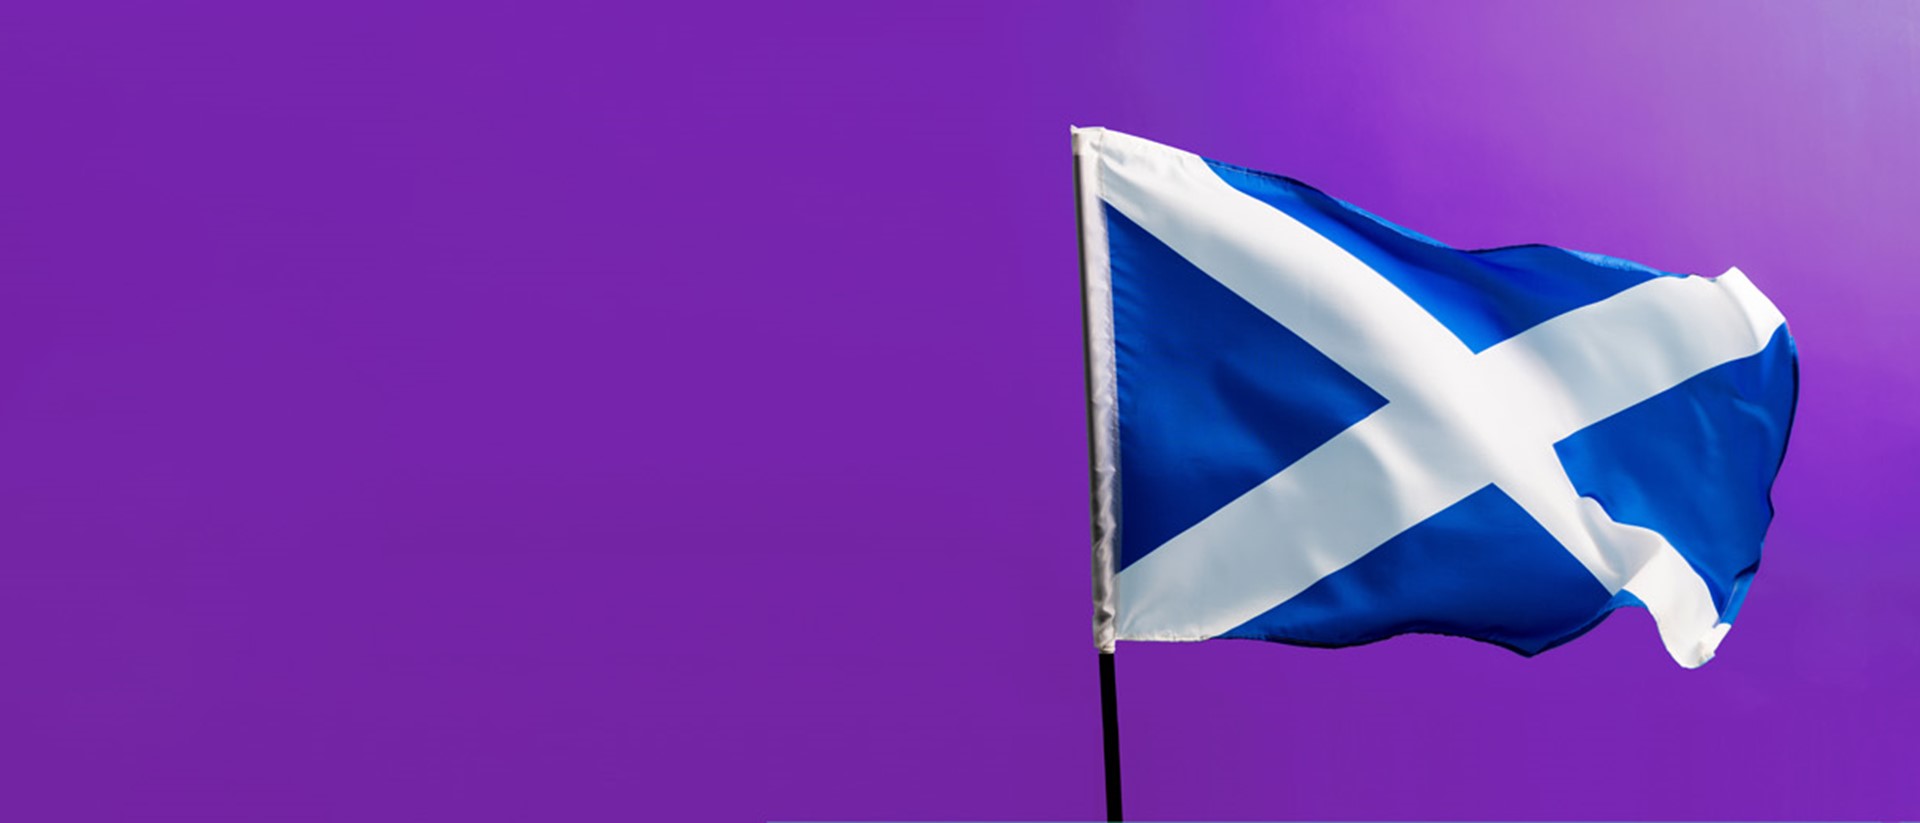 Image of the Scottish flag against a purple background